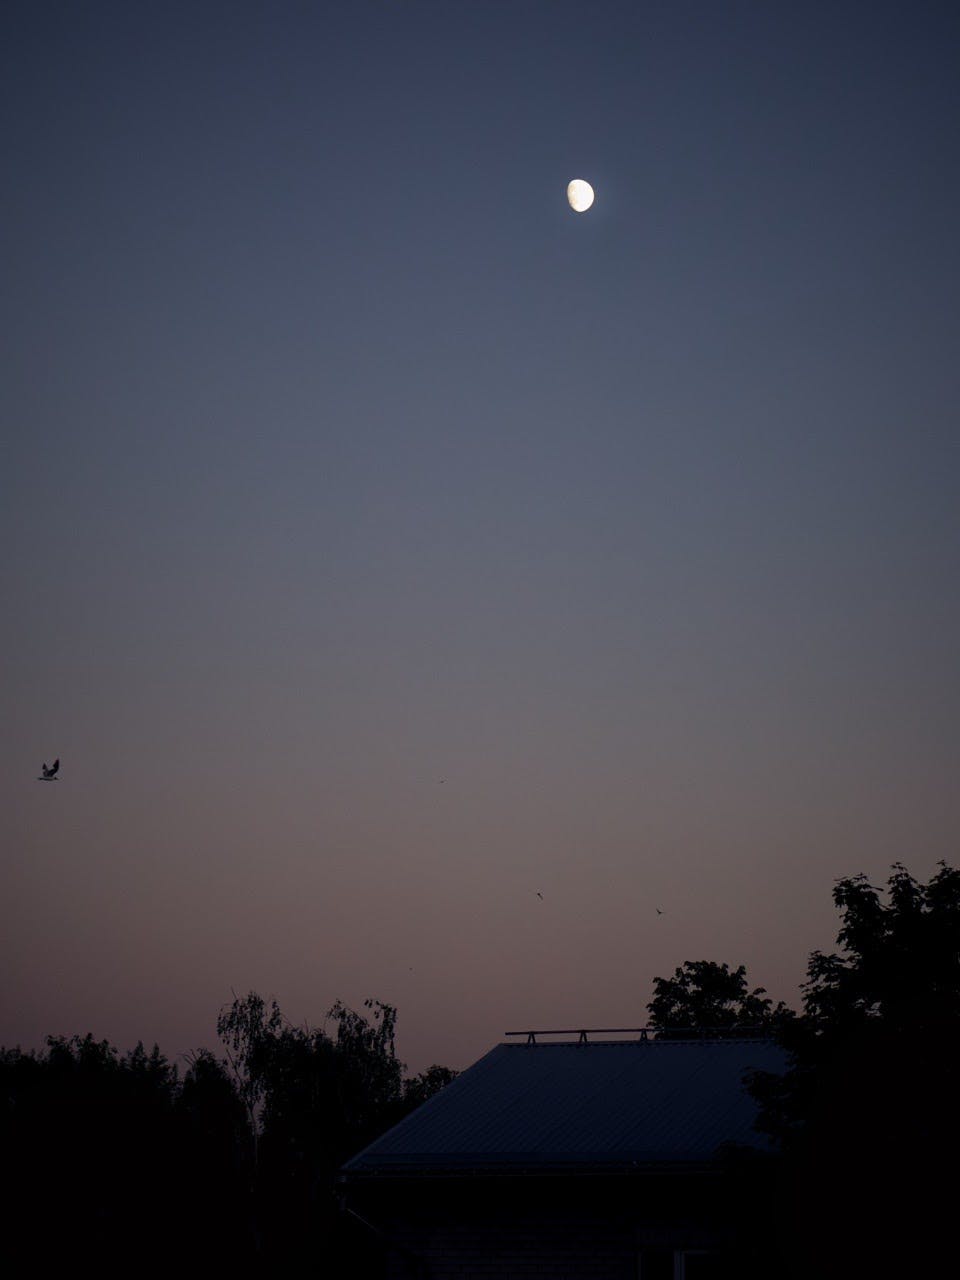 Sunset at 22:45 with a clear sky and the moon in Sikupilli area in Tallinn.